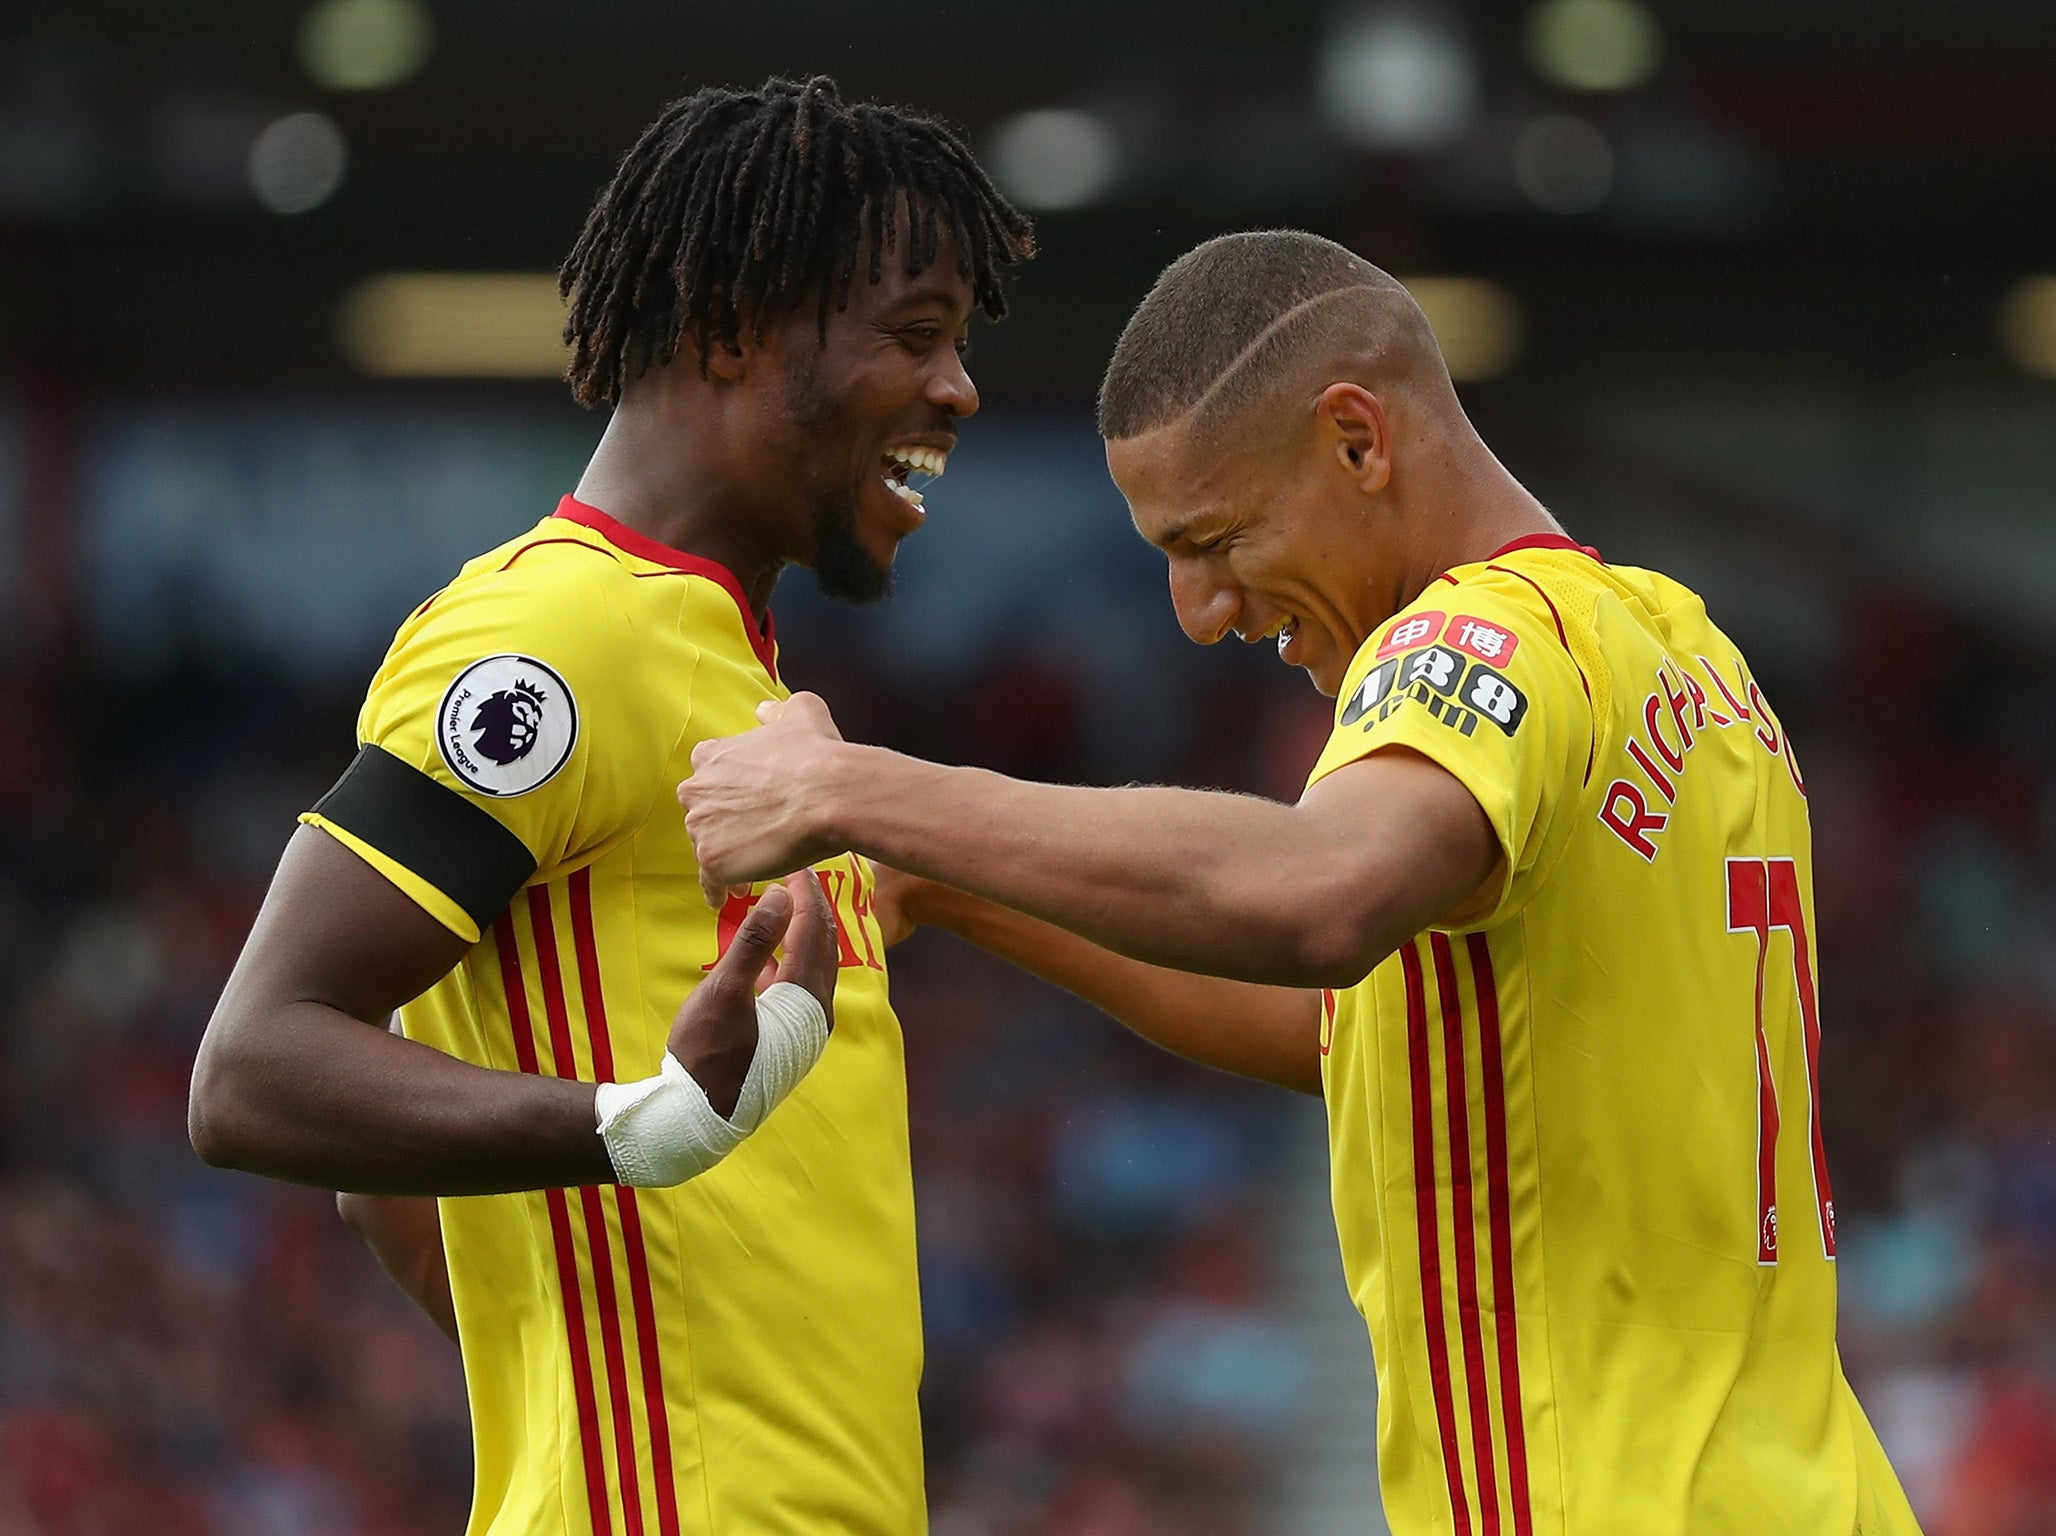 The midfielder made a bright start to his Watford career